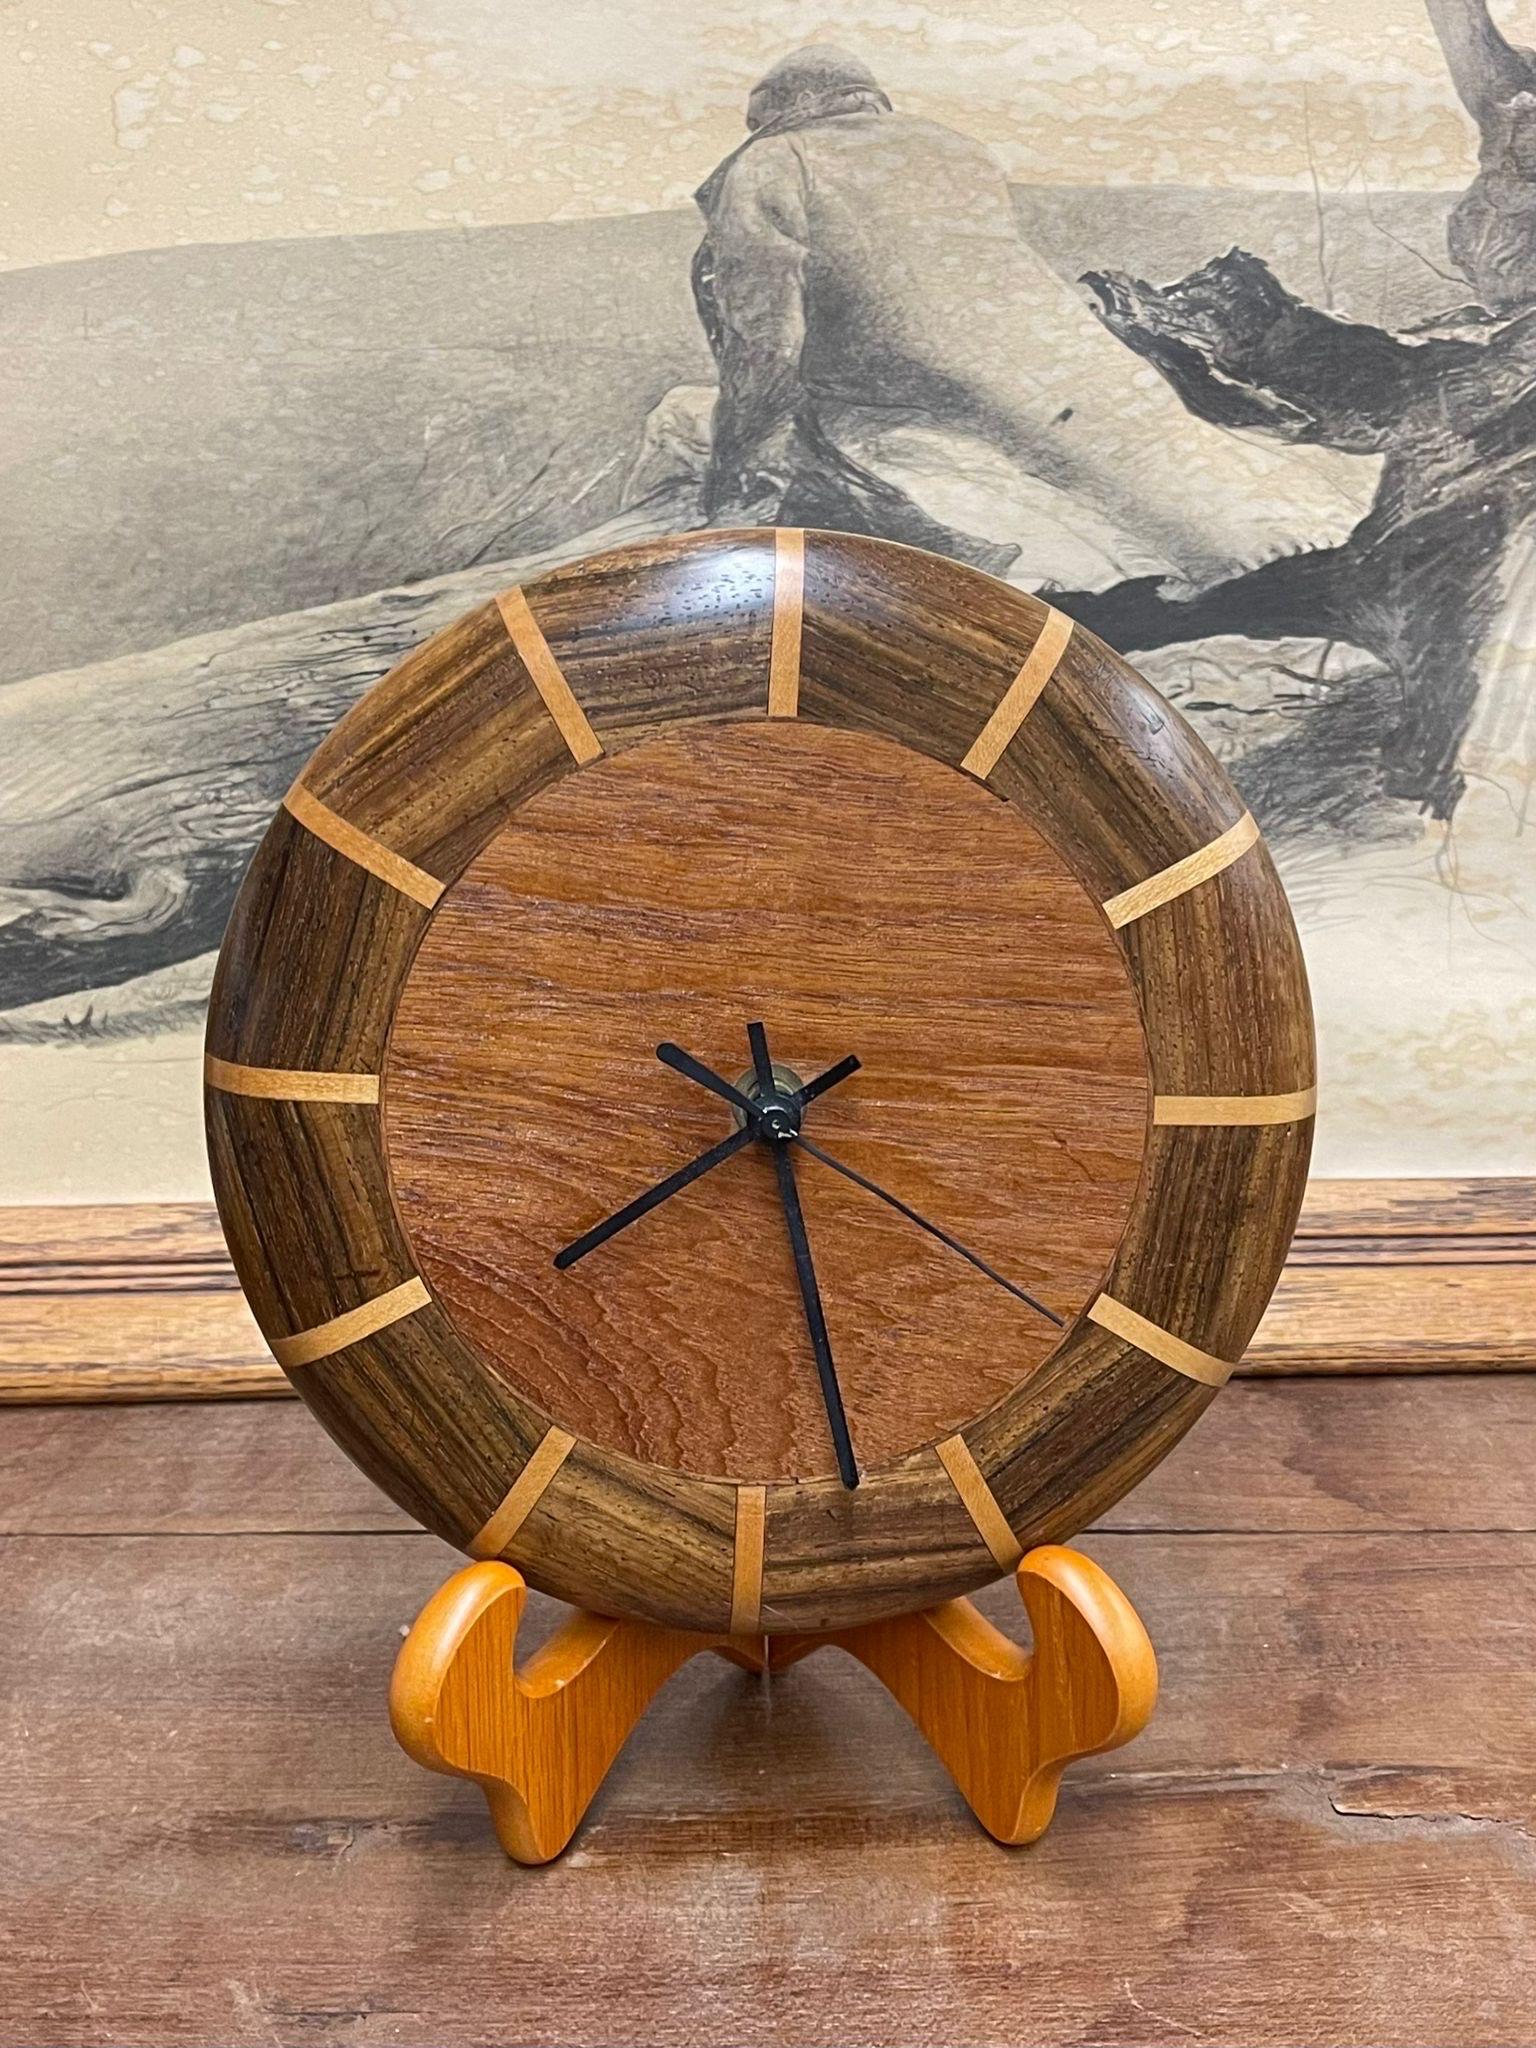 Sleek Wooden Wall Clock with Different Wood Textures. Stand Not Included. Operational Ability Unknown . Vintage Condition Consistent with Age as Pictured.

Dimensions. 9 1/2 Diameter; 2 D